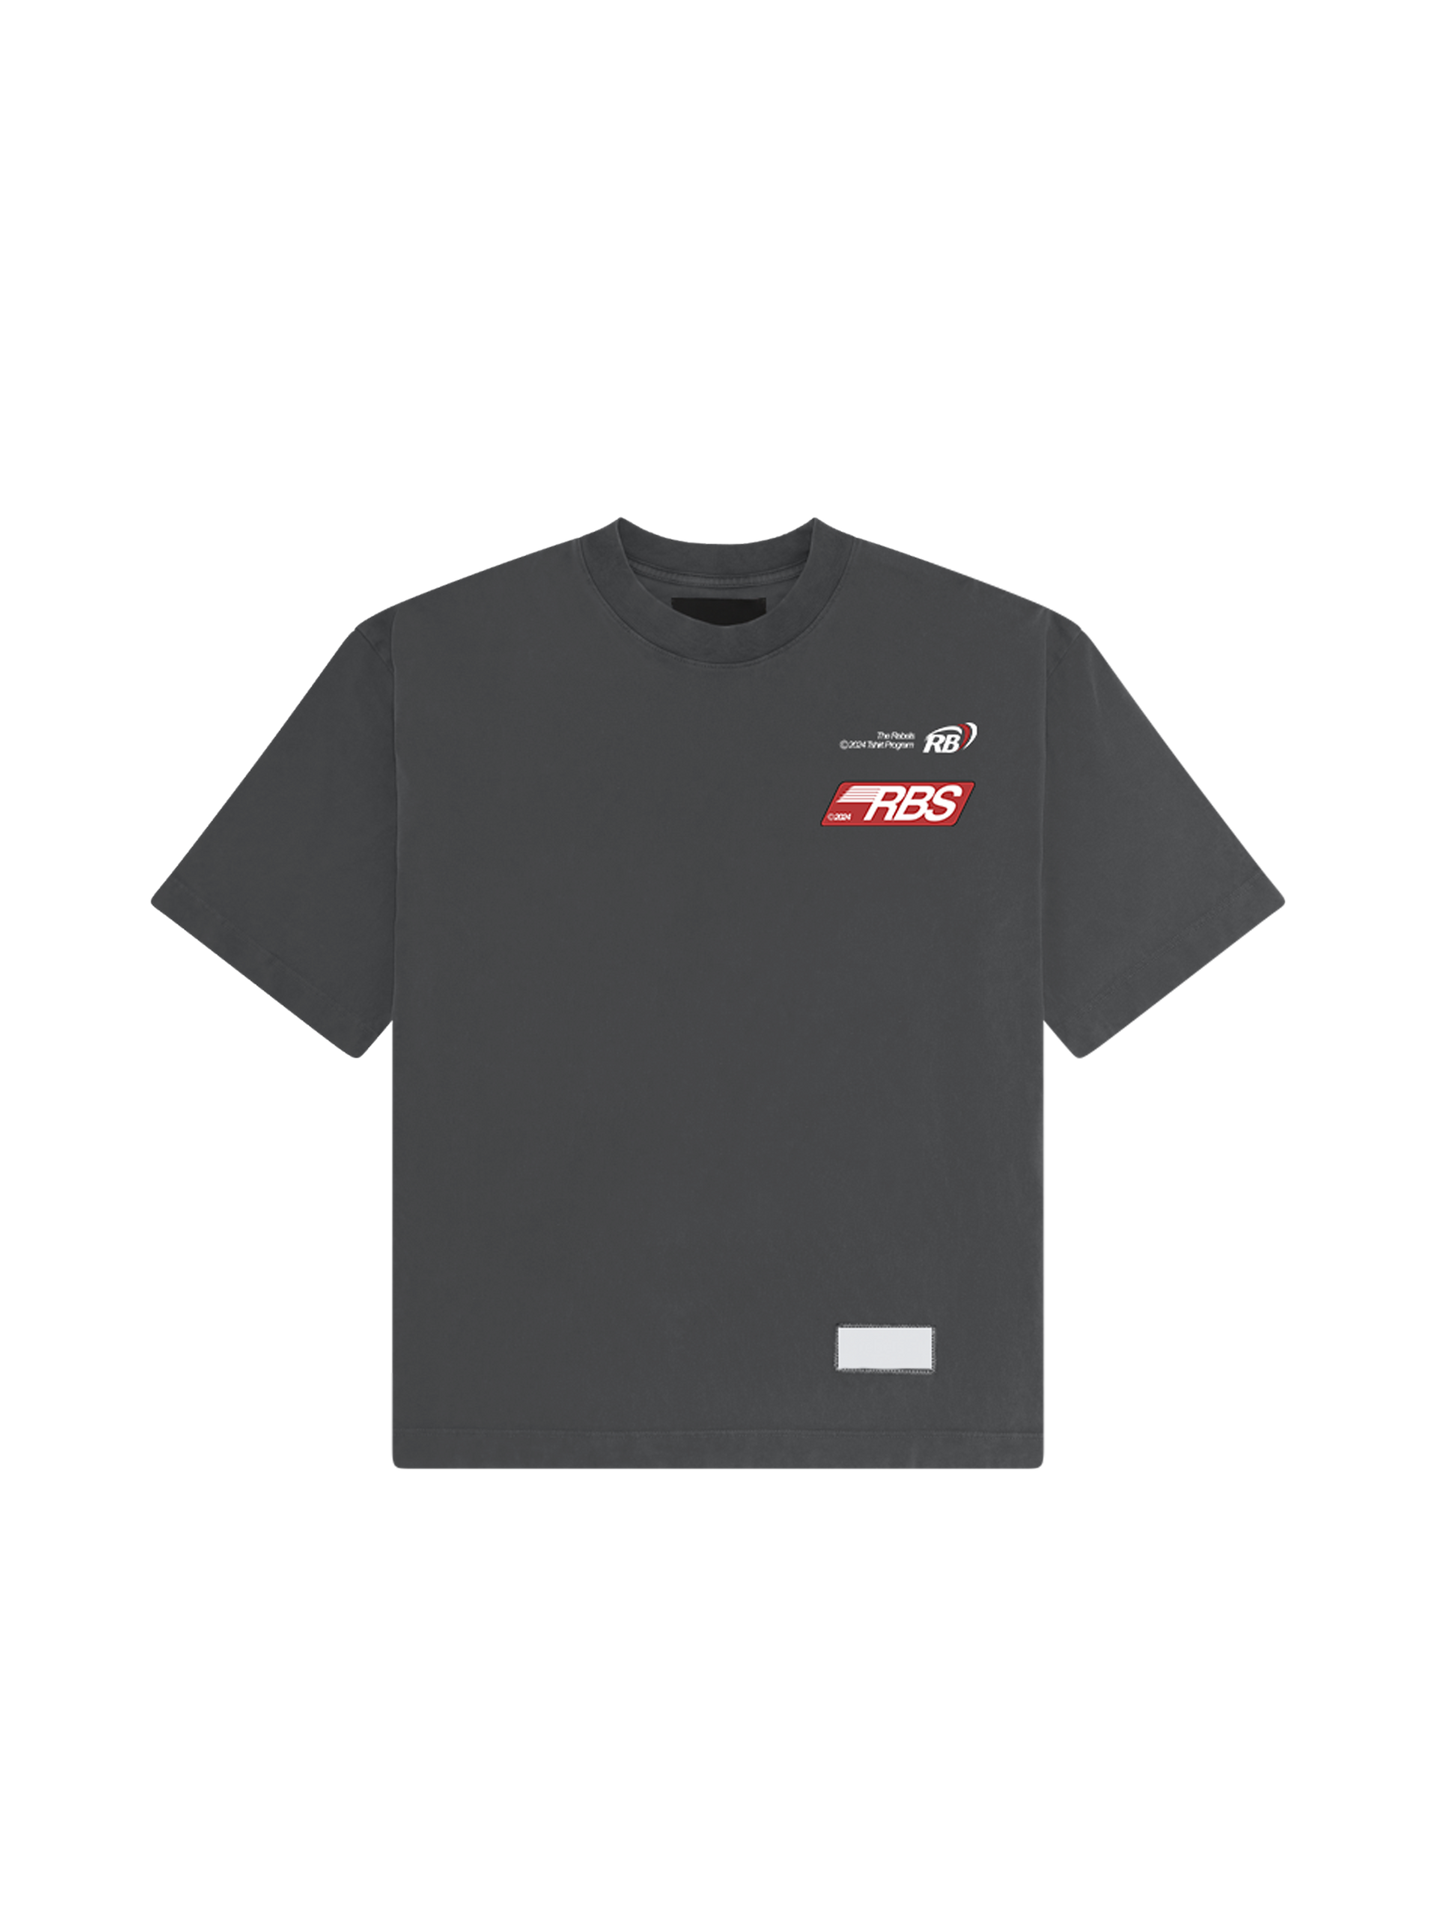 RB trademark t-shirt - washed grey